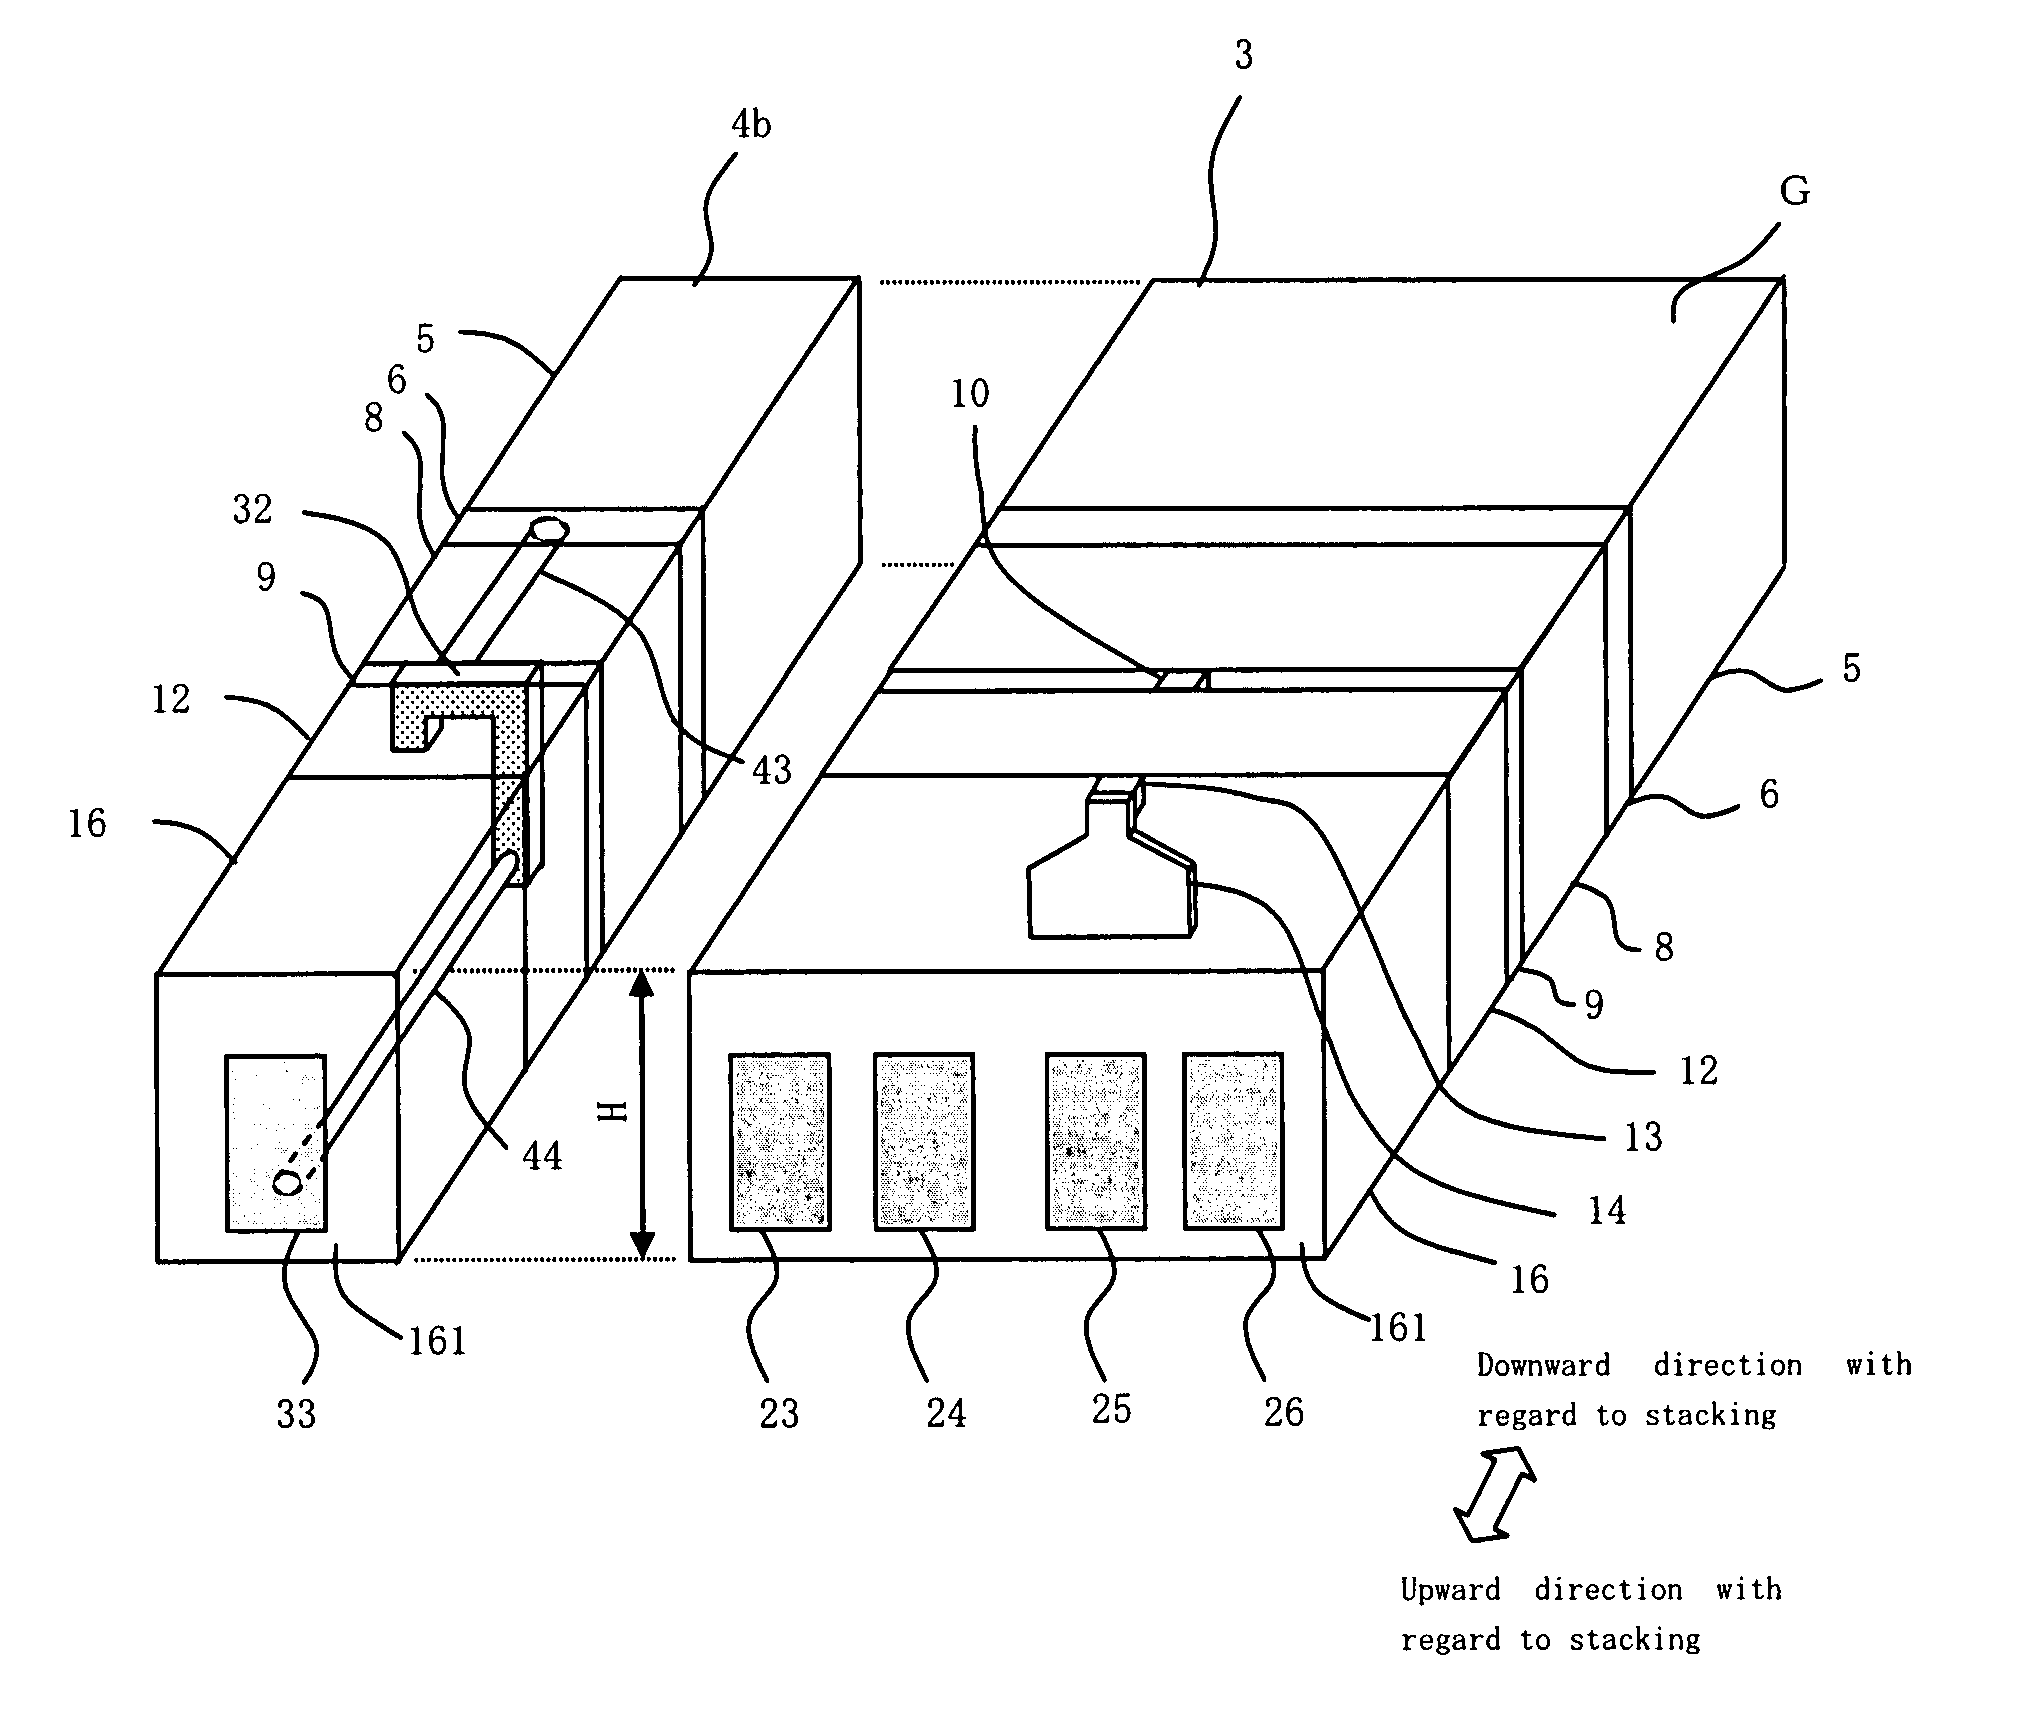 Element for detecting the amount of lapping having a resistive film electrically connected to the substrate